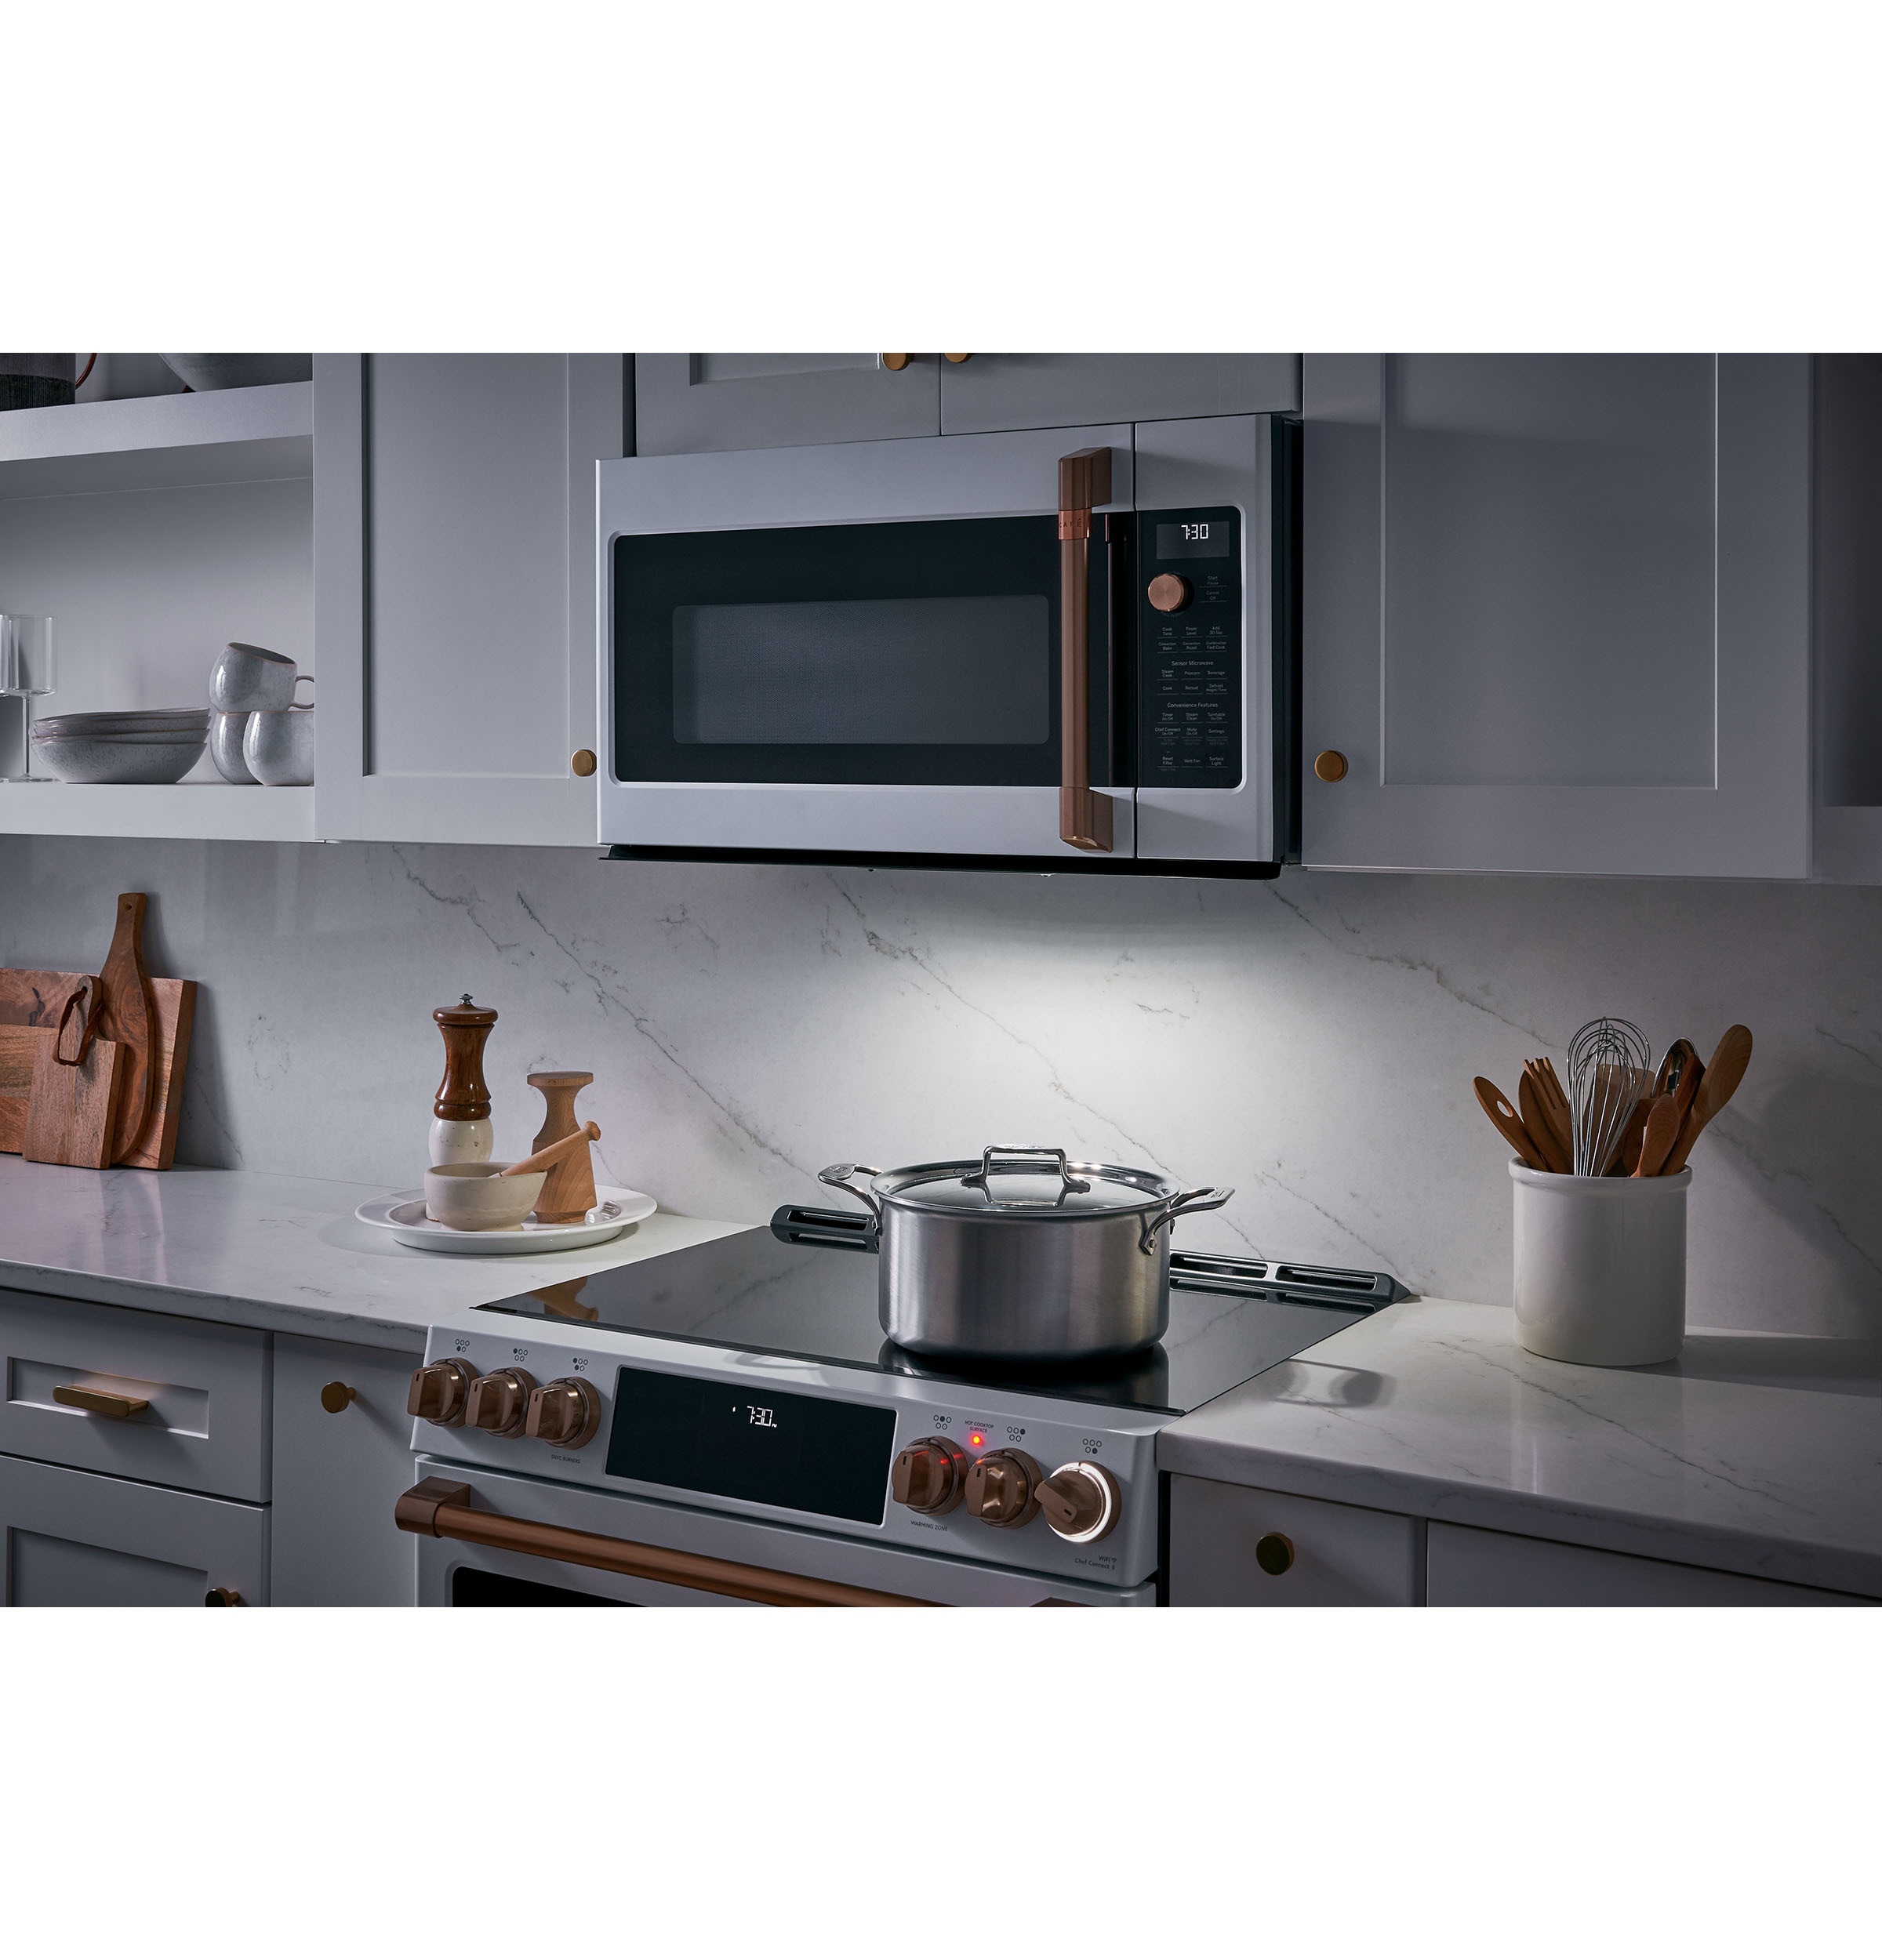 DISCONTINUED MODEL CLEARANCE! Café™ 1.5 Cu. Ft. Smart Countertop  Convection/Microwave Oven in Platinum Glass